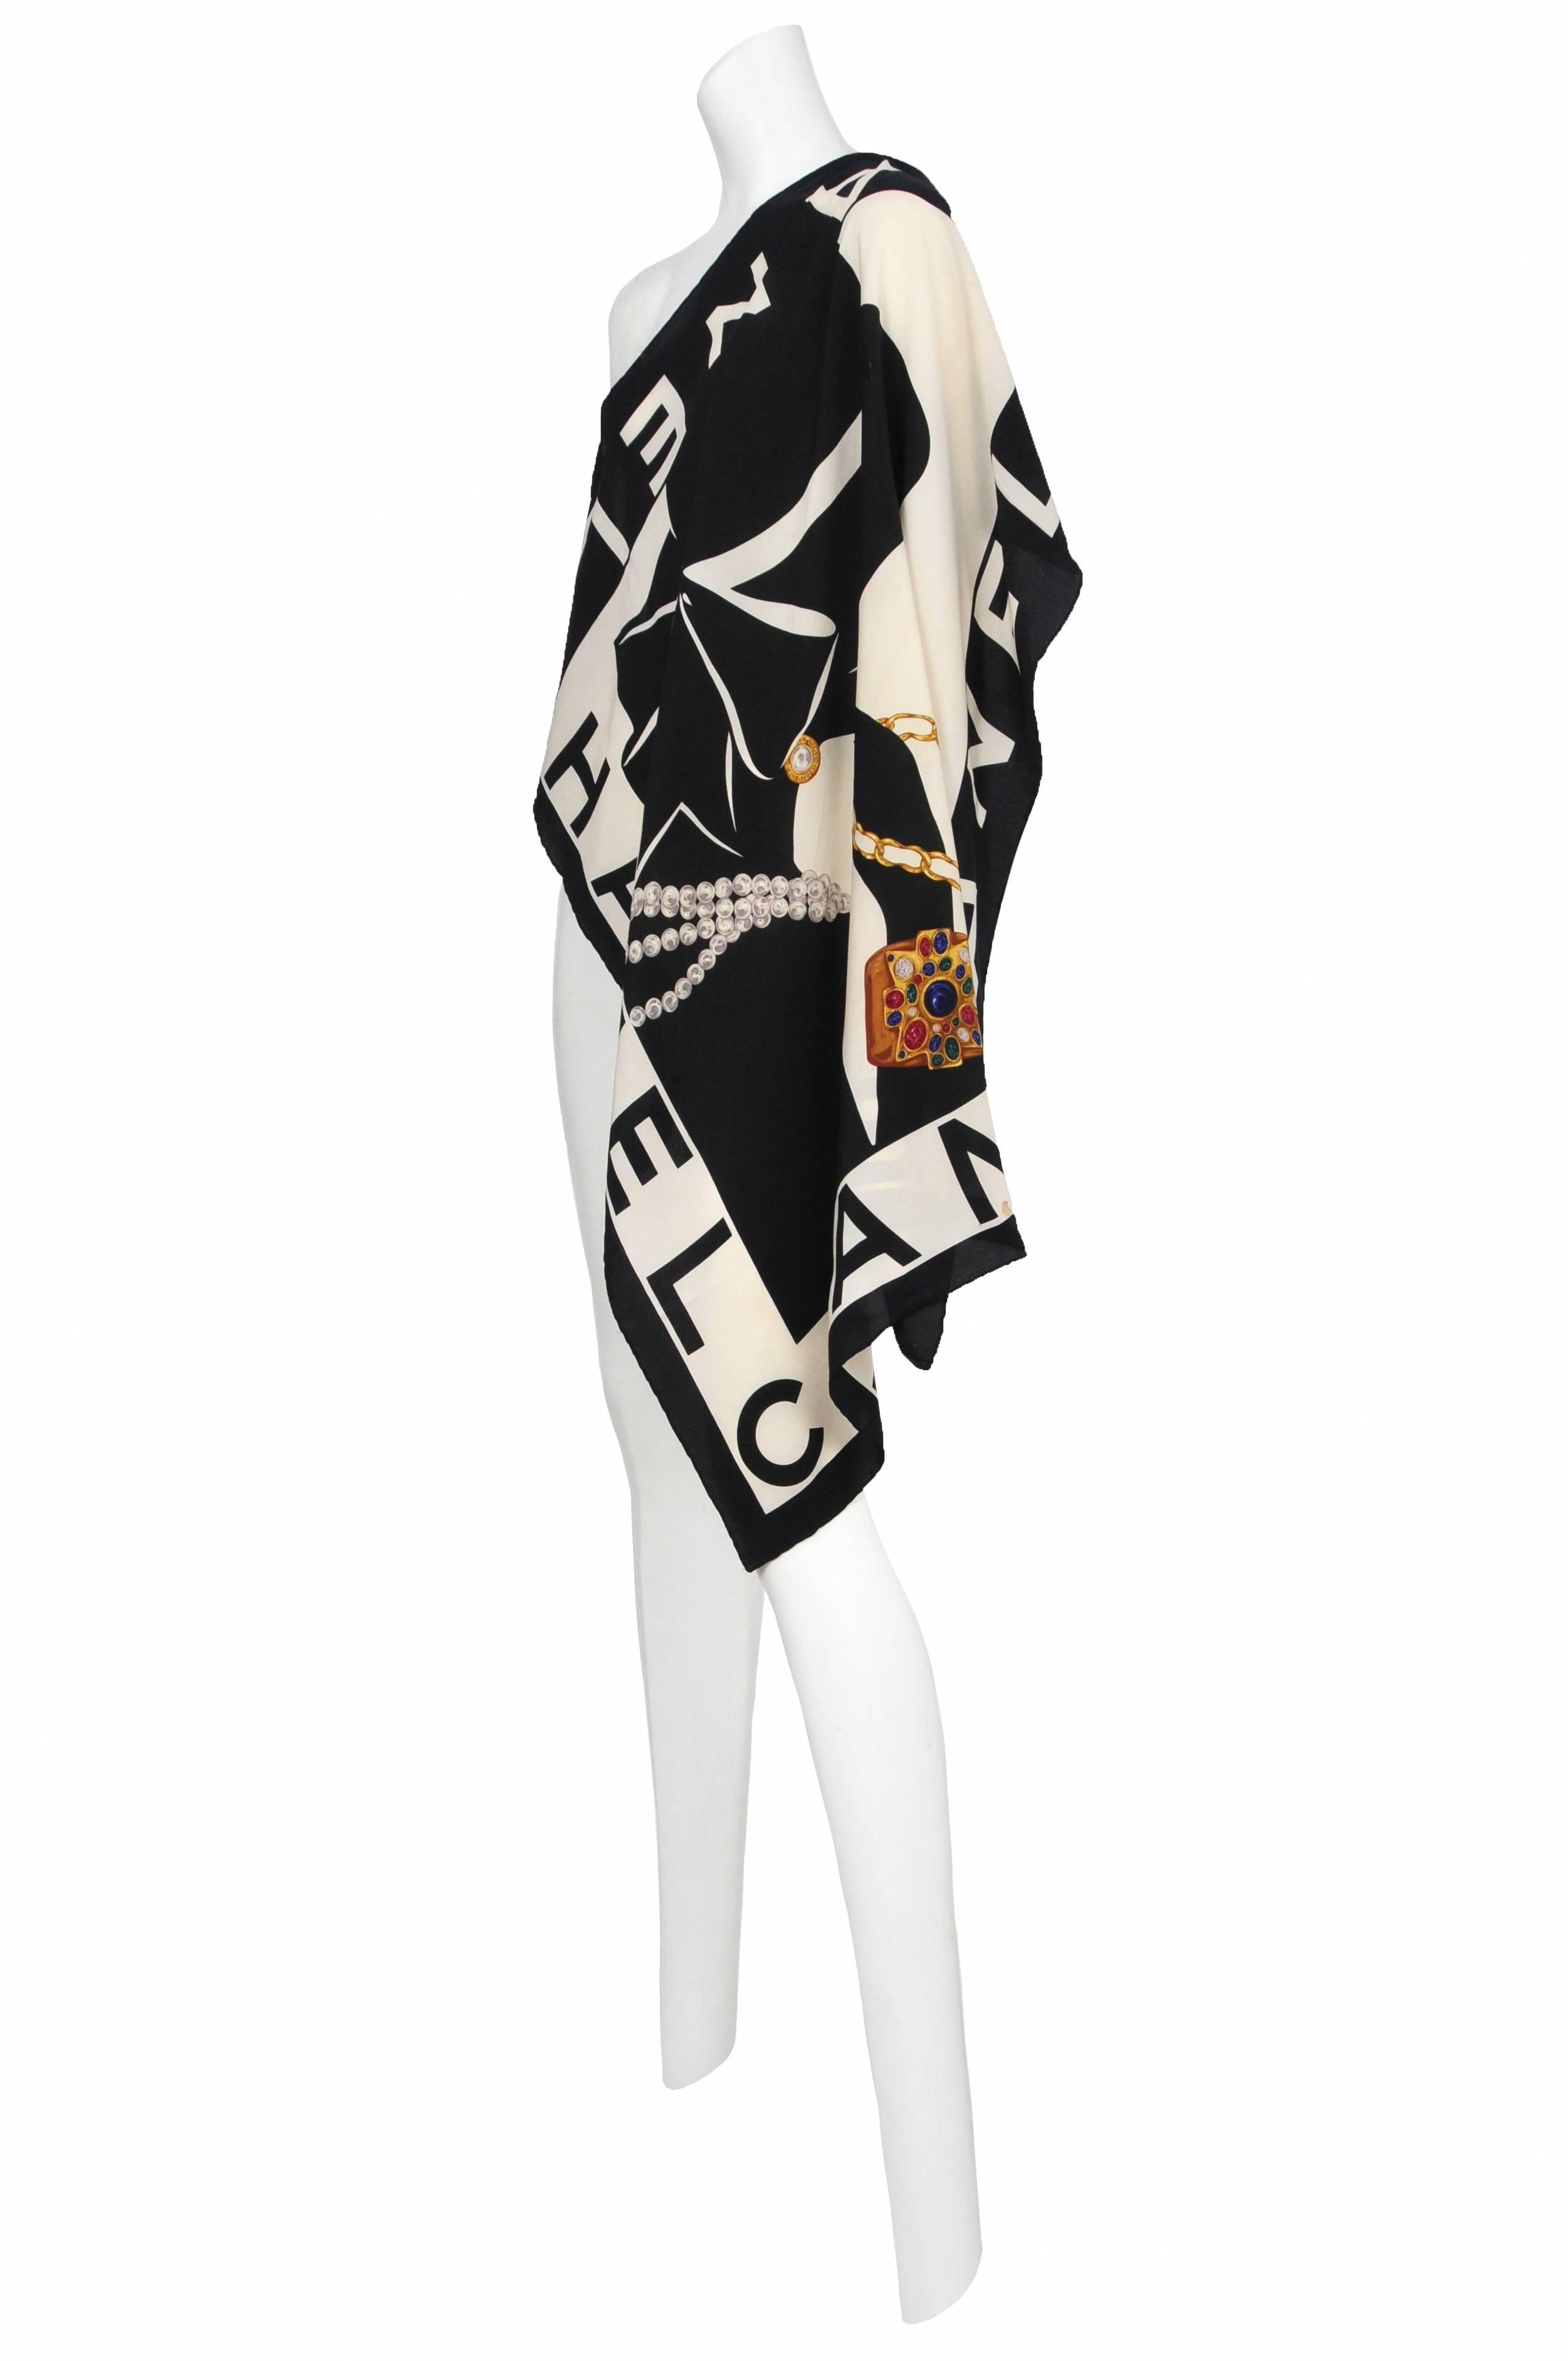 Vintage Chanel silk black and cream square scarf featuring a hand rolled hem and jewelry adorned lady print. 